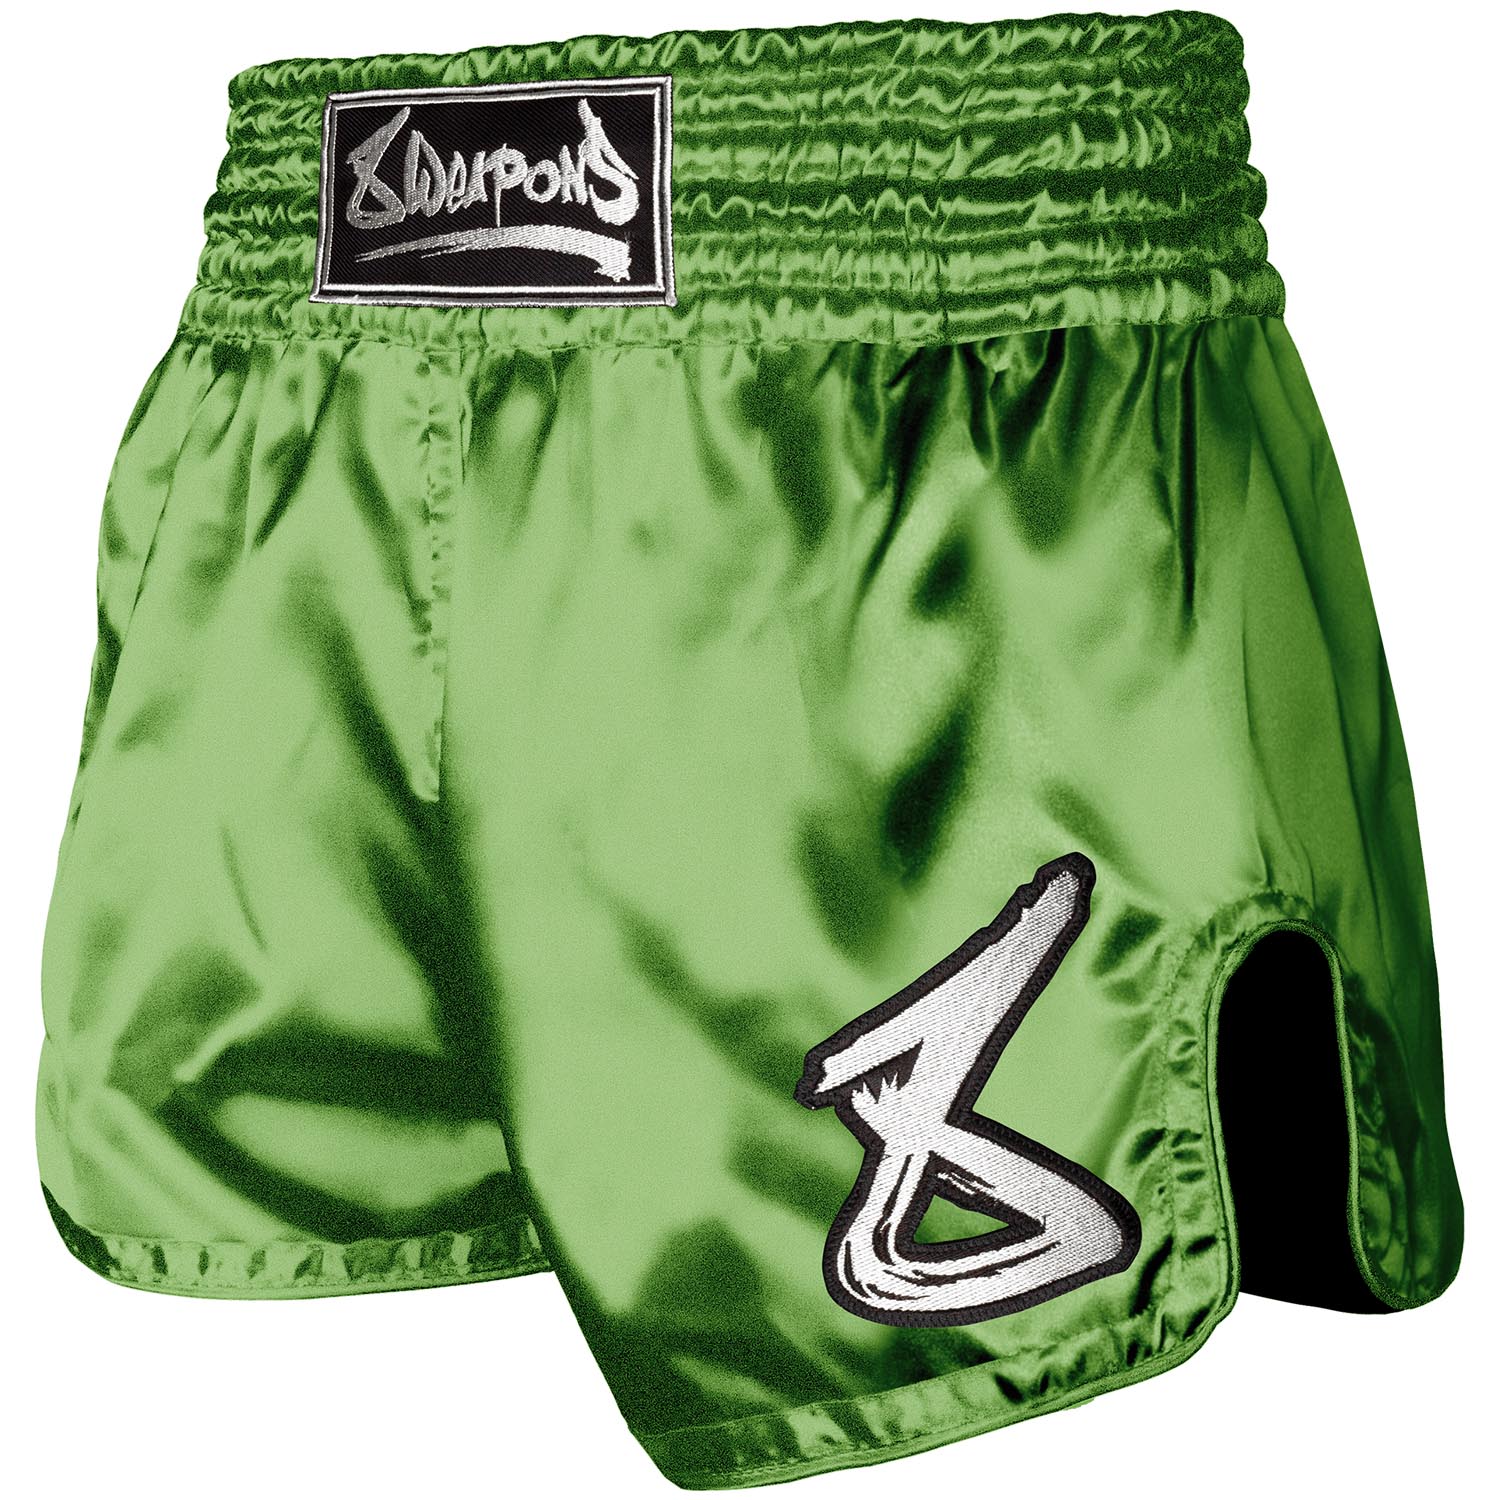 8 WEAPONS Strike Shorts, green, S